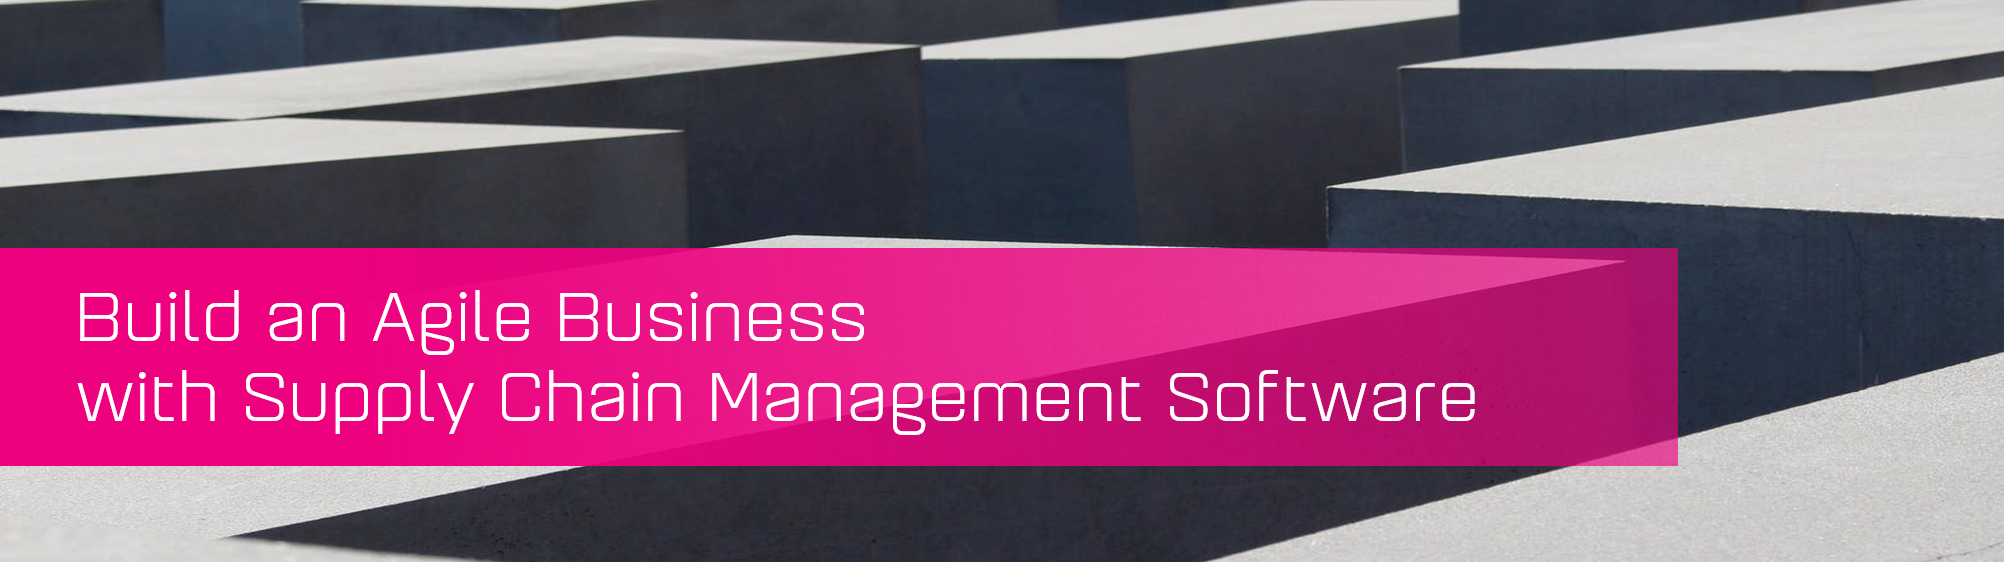 KCS SA - Blog - Build an Agile Business with Supply Chain Management Software banner